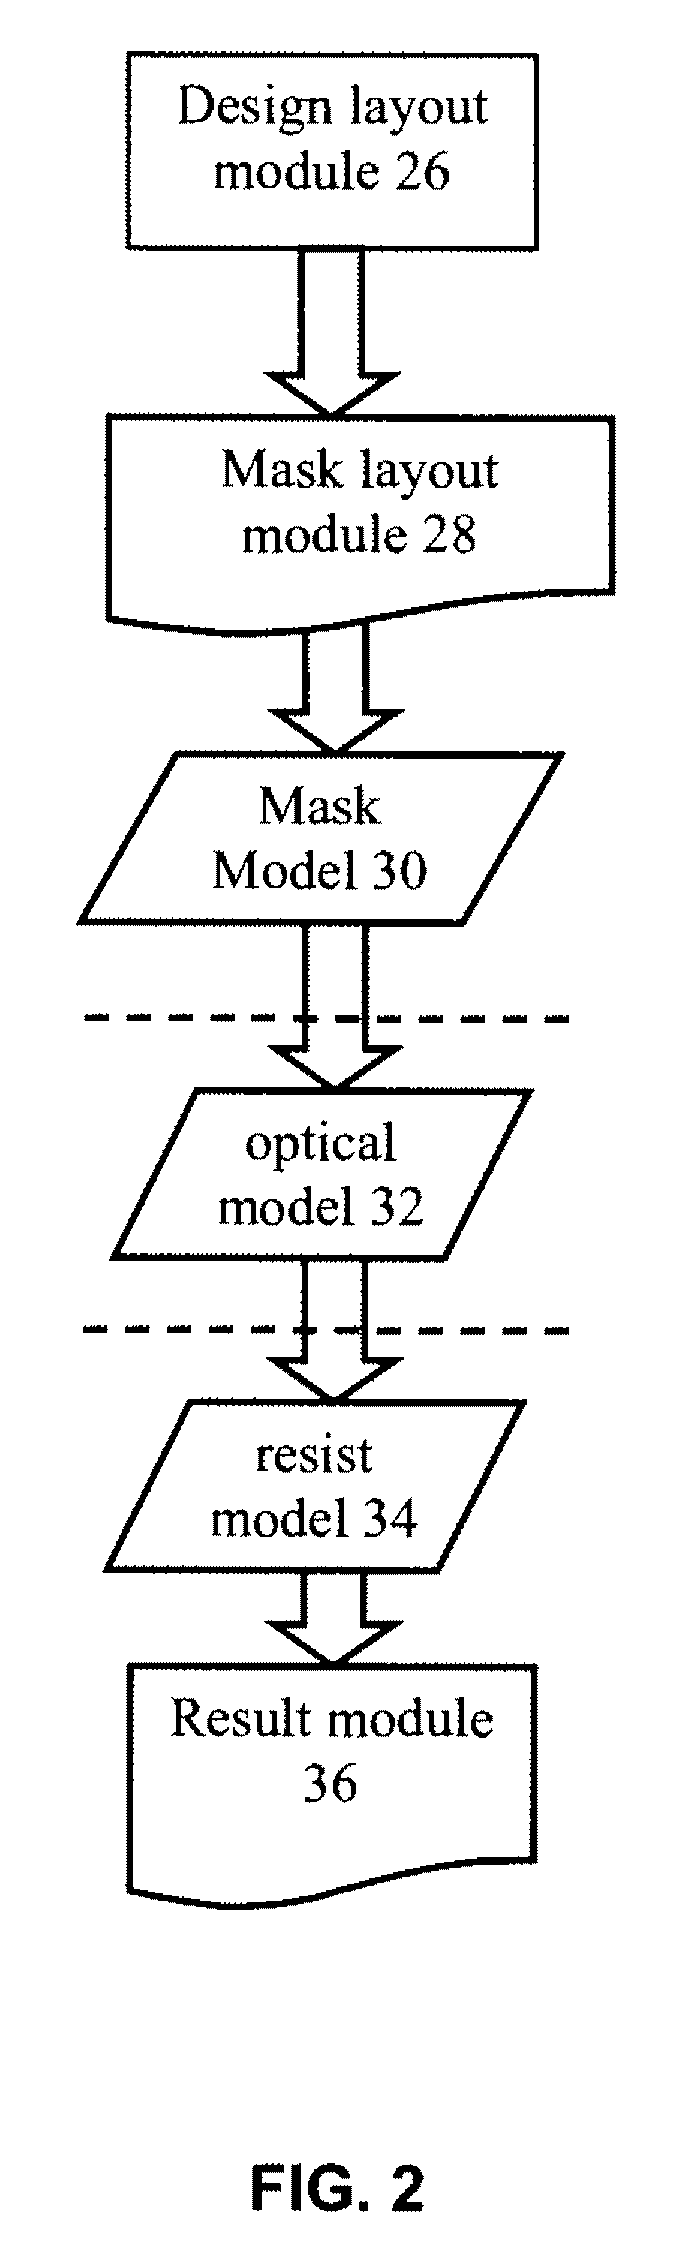 Scanner model representation with transmission cross coefficients